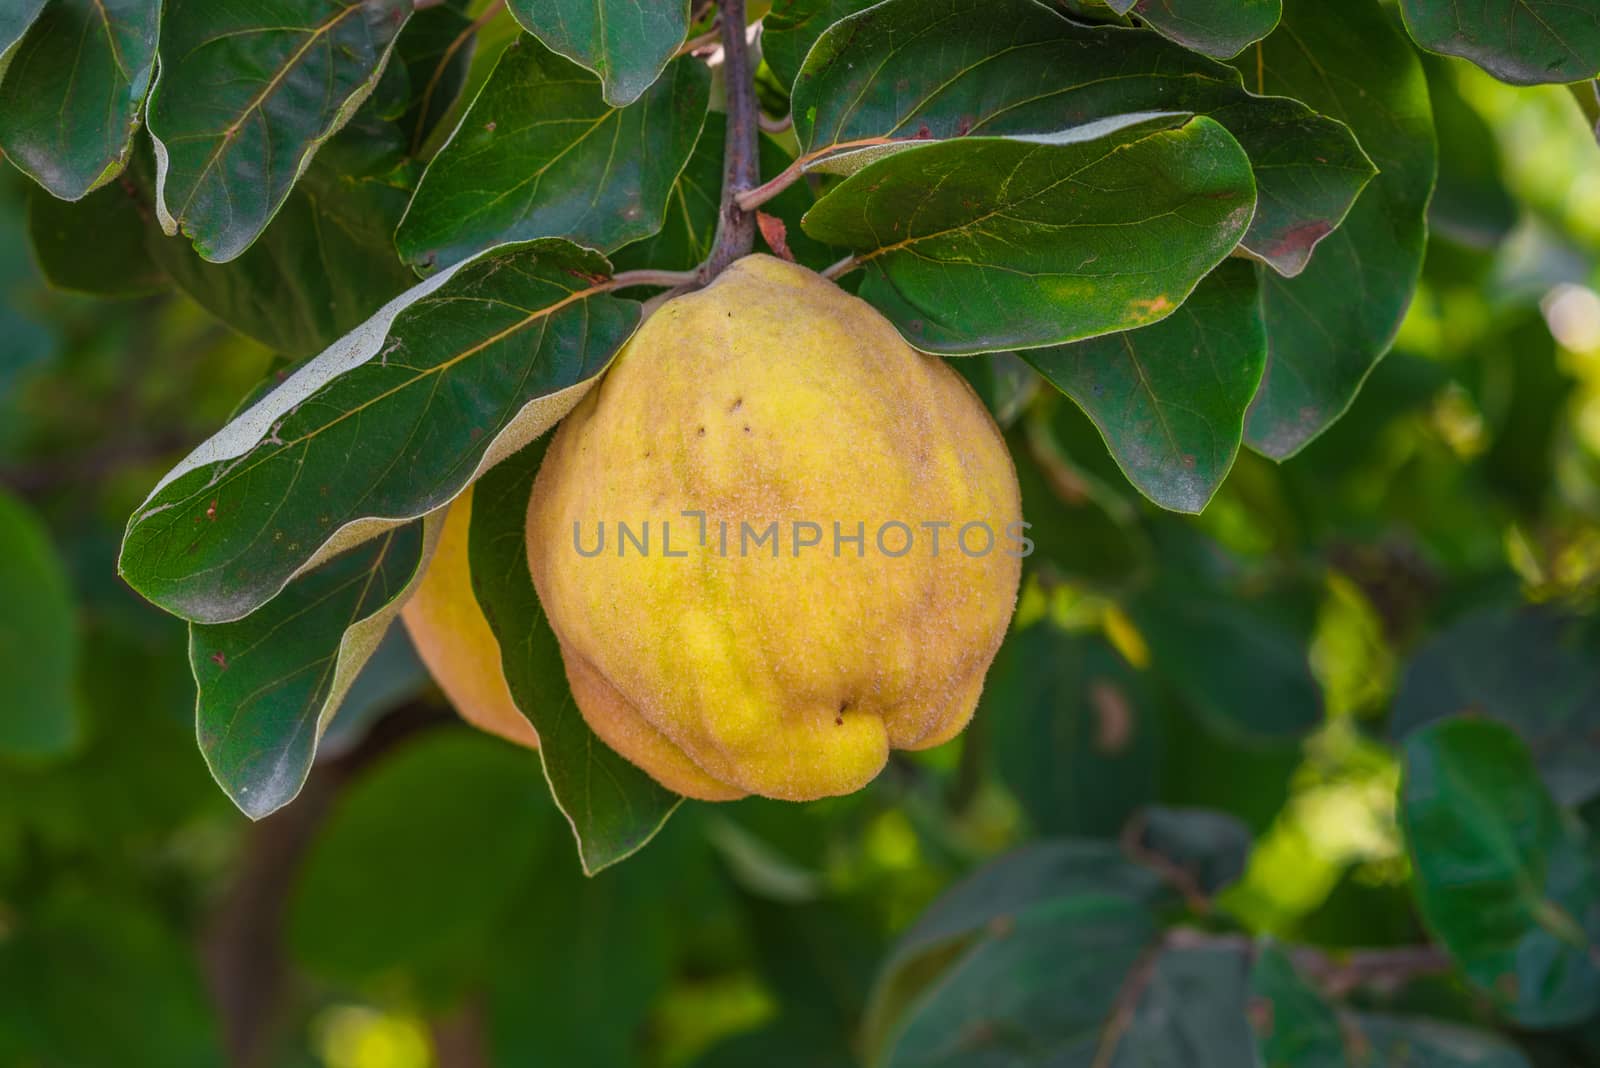 Quince tree with ripe fruit. Yellow ripe quince. Quince is ready for harvesting.